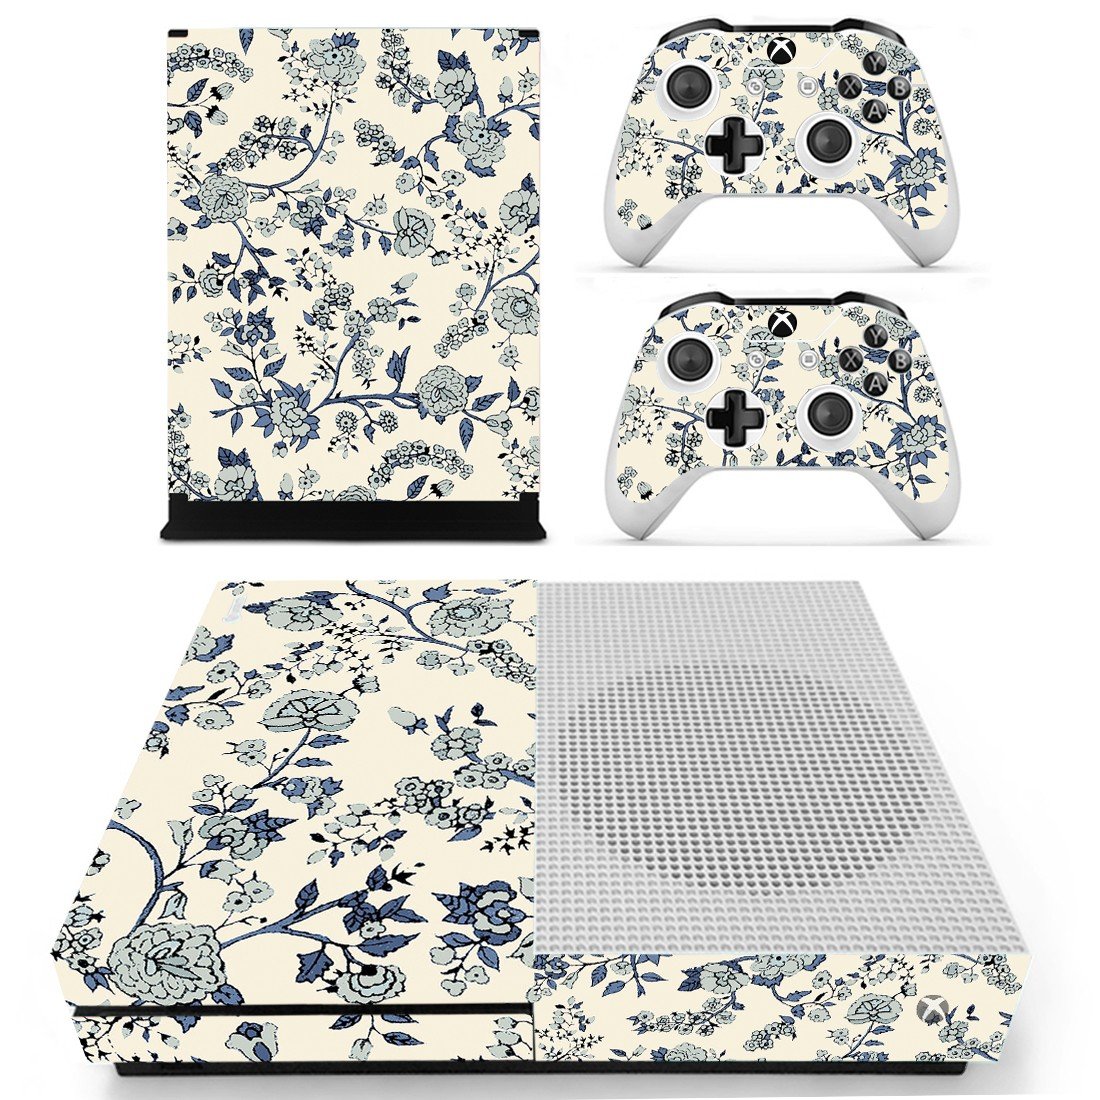 Floral Pattern Sticker For Xbox One S And Controllers